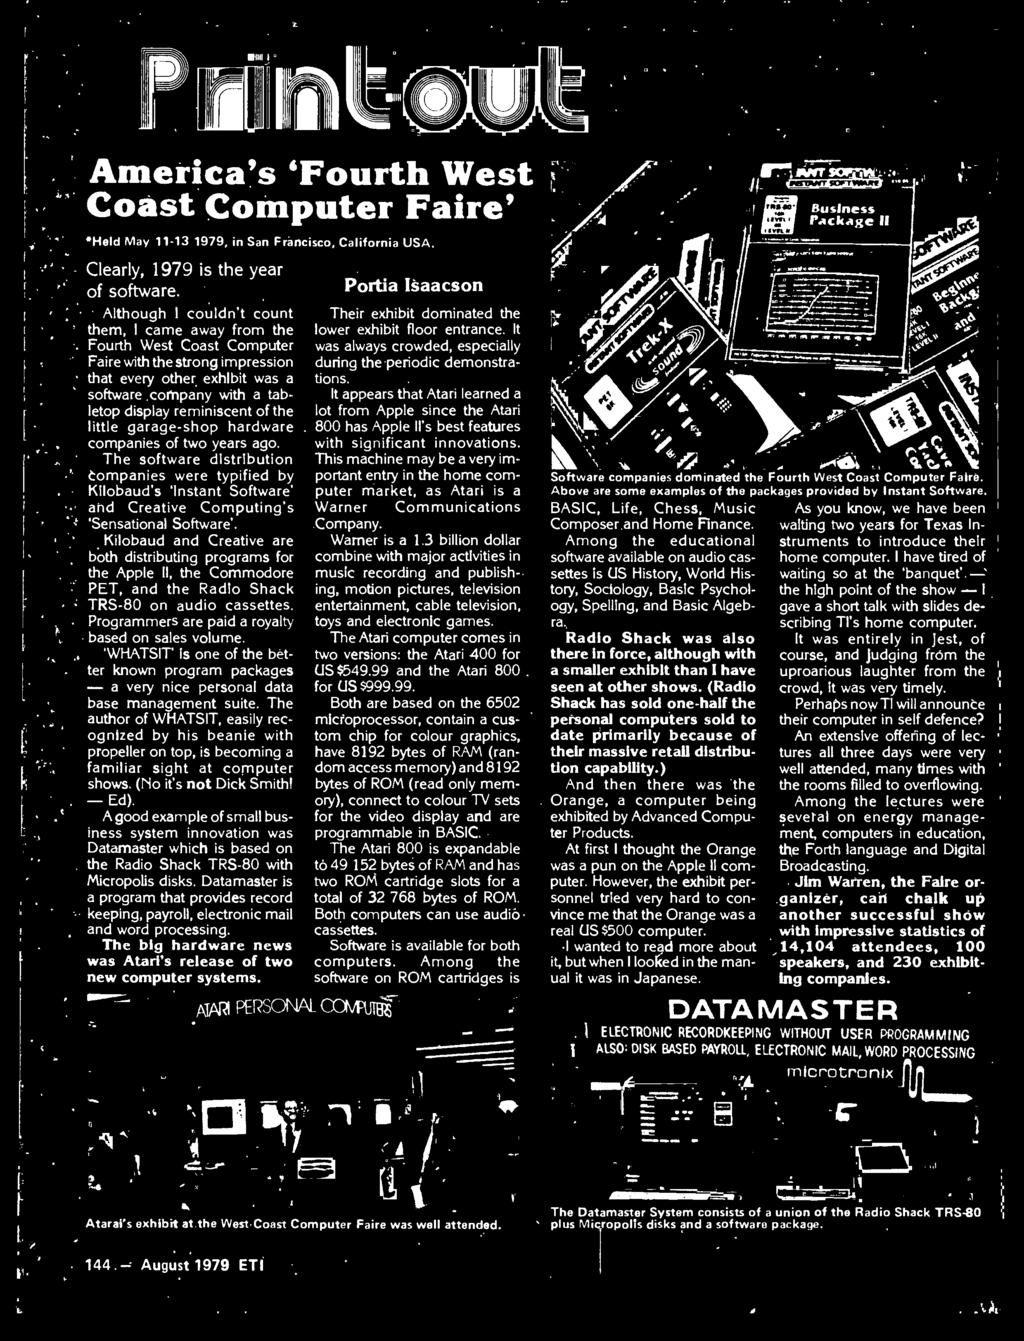 Kilobaud and Creative are both distributing programs for the Apple II, the Commodore PET, and the Radio Shack TRS-80 on. audio cassettes. Programmers are paid a royalty based on sales volume.